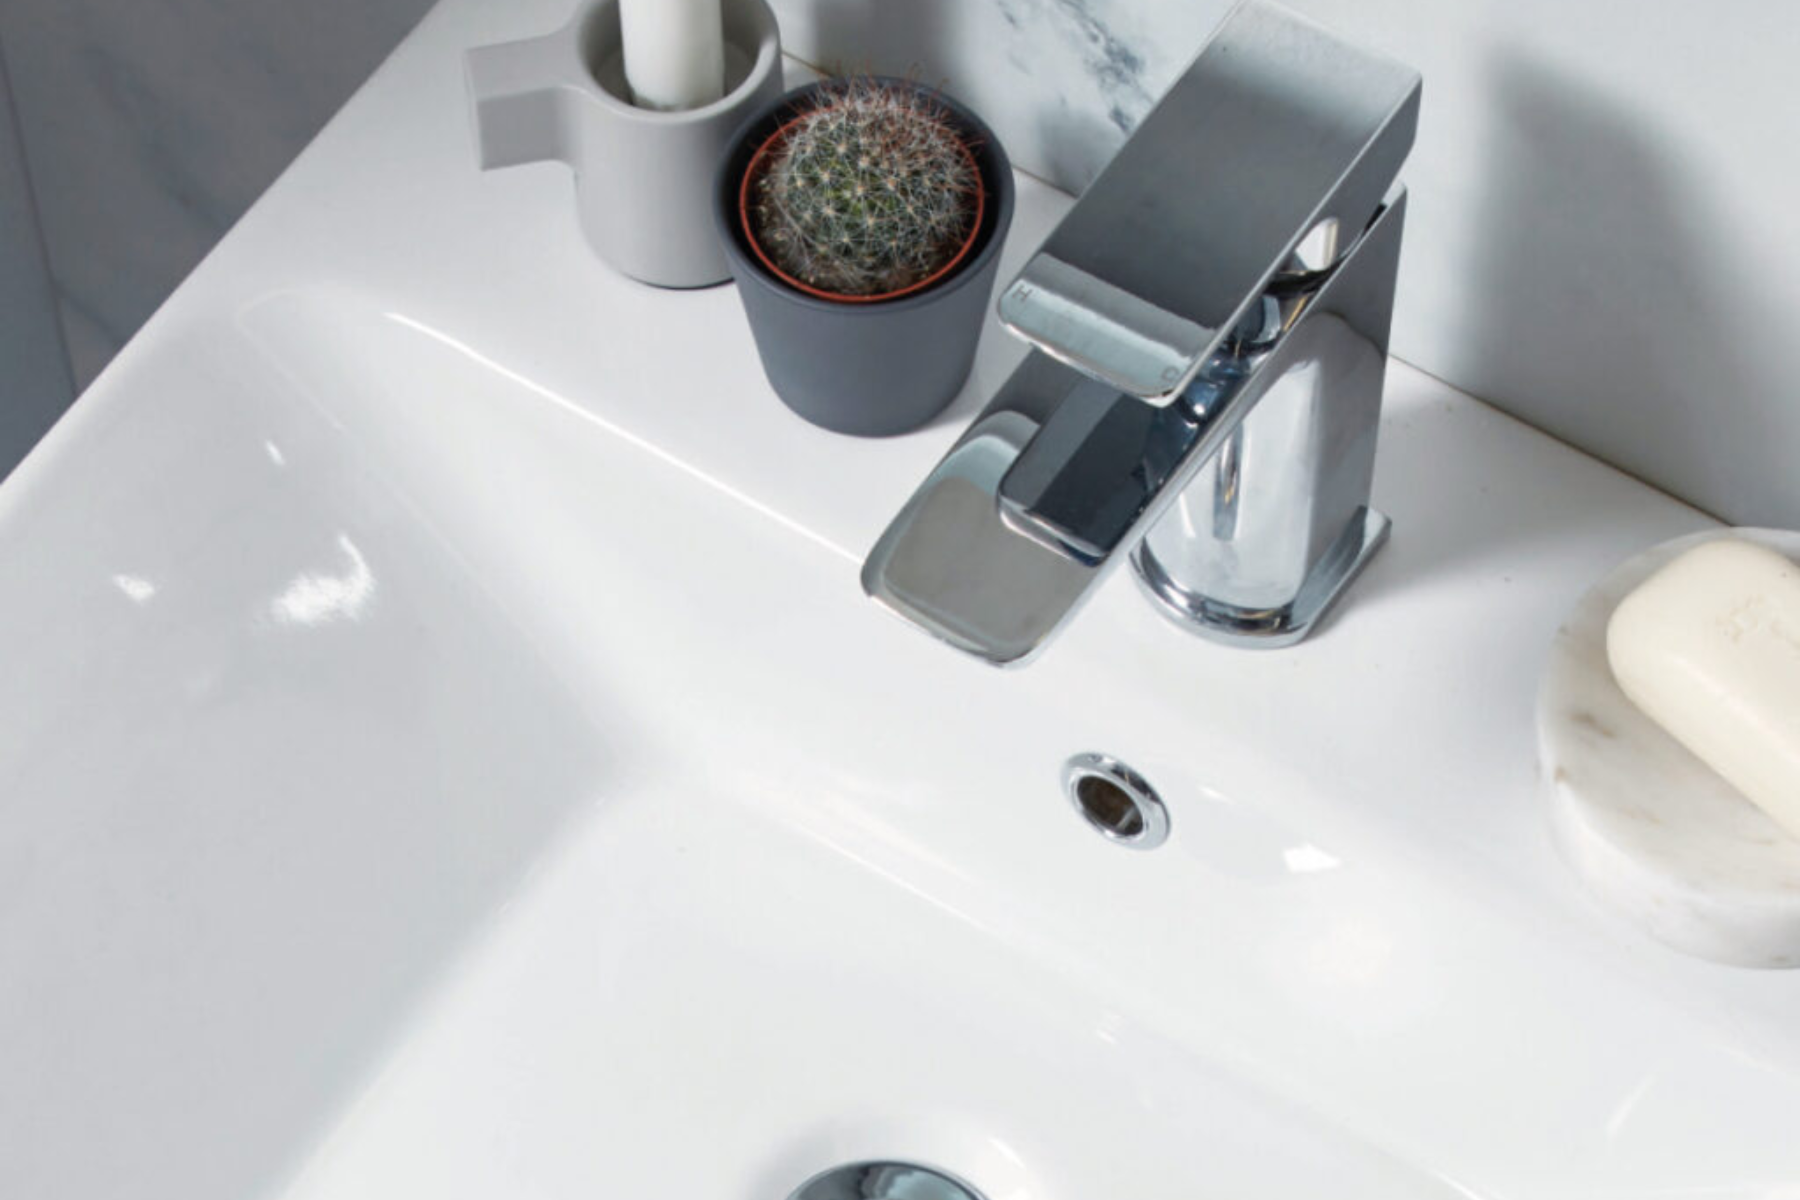 Stylish Modern Cloakroom Tap In Home Setting